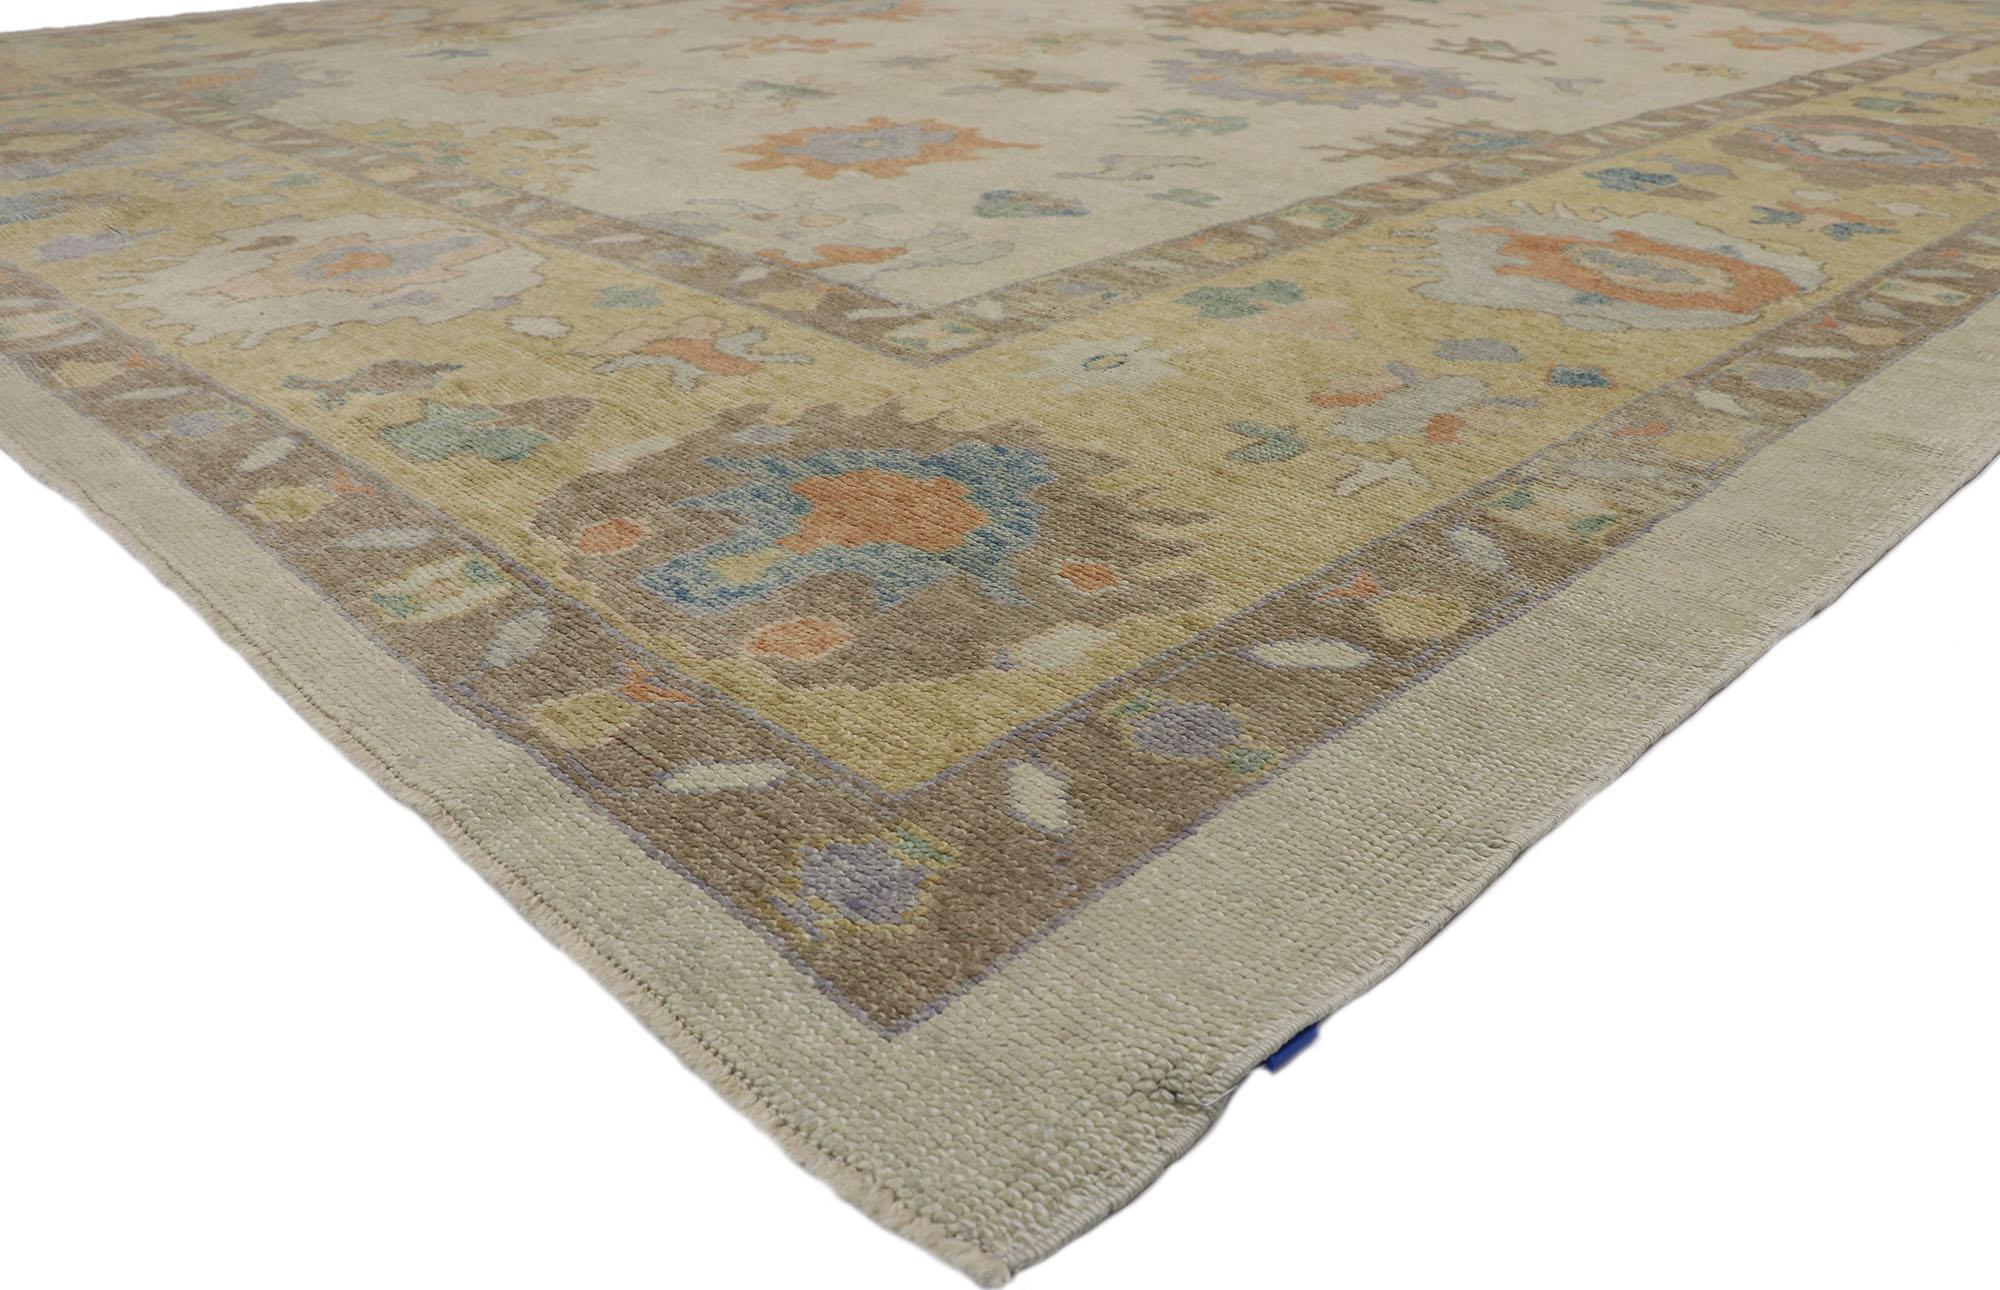 52735, New Contemporary Turkish Oushak Rug with Transitional Coastal Style. Blending elements from the modern world with light and airy colors, this hand knotted wool contemporary Turkish Oushak style area rug will boost the coziness factor in